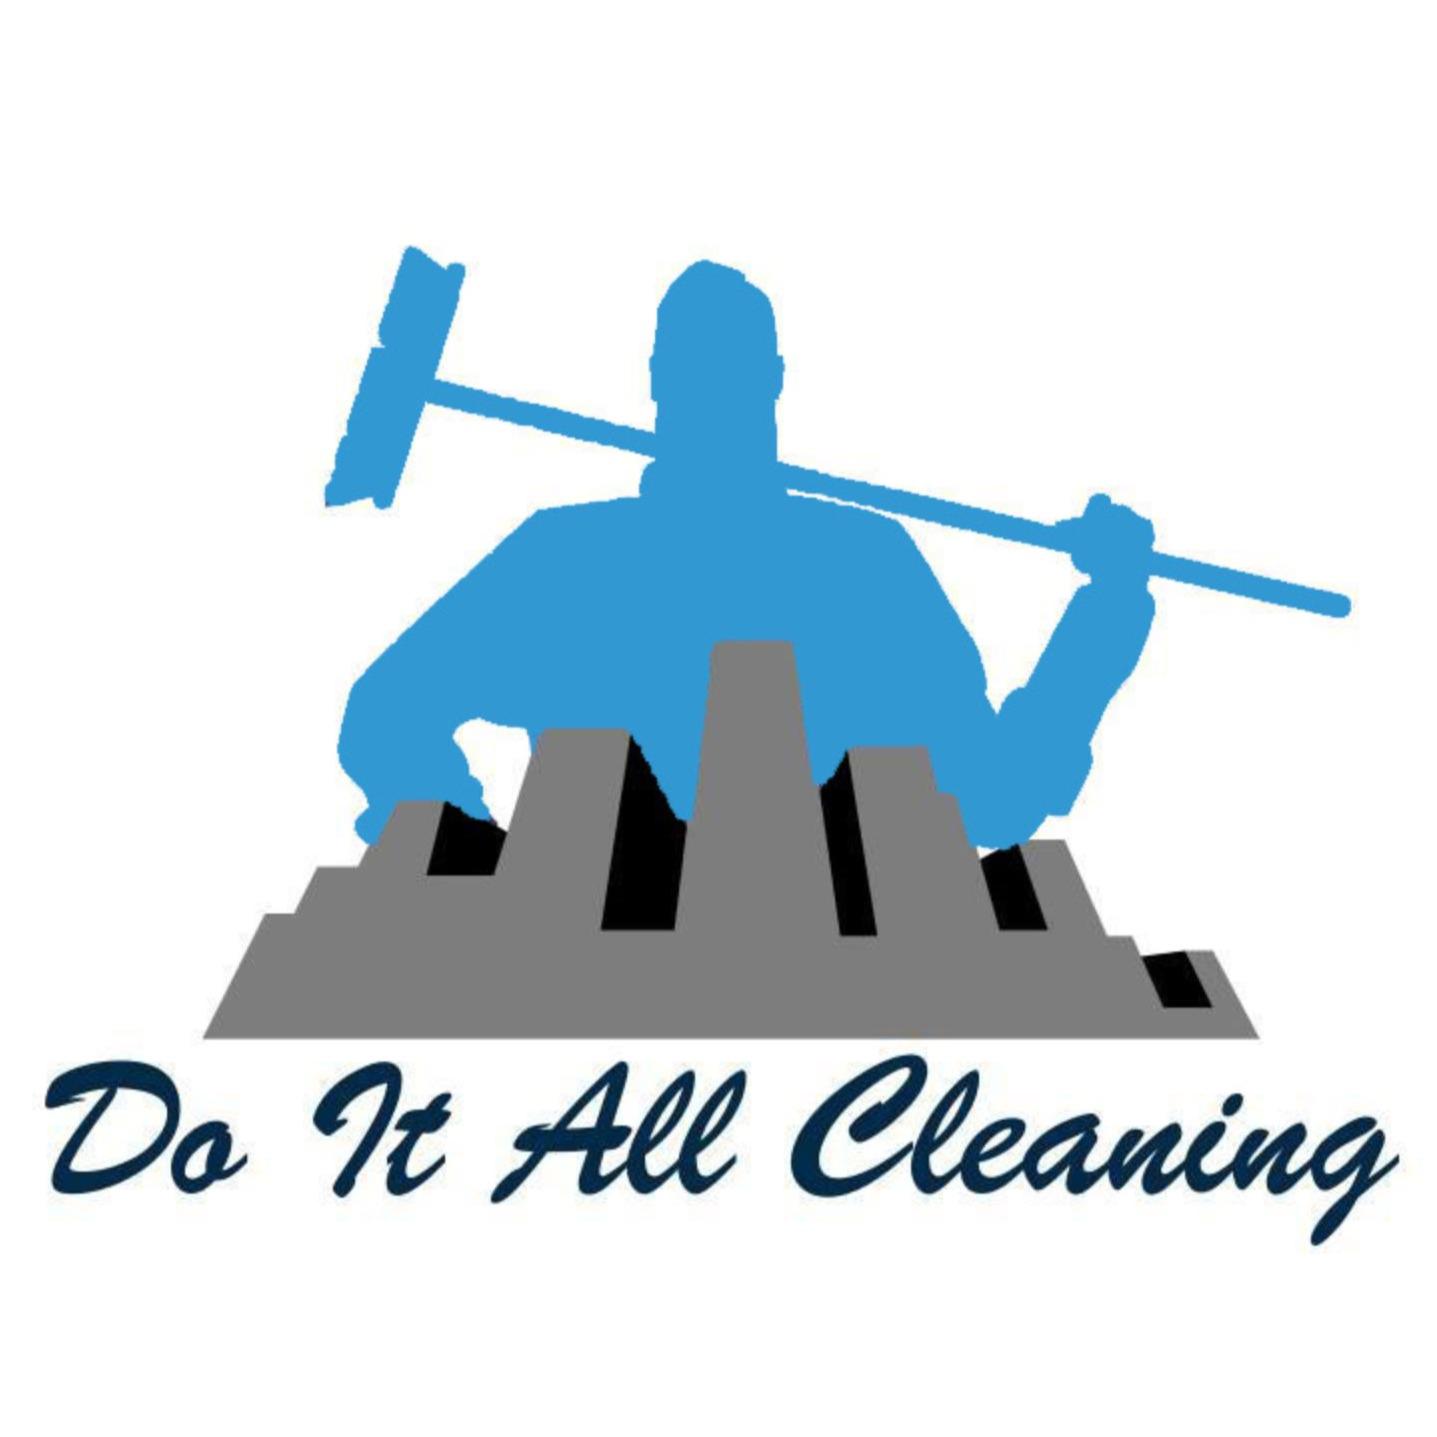 Do It All Cleaning - Wickliffe, OH - (216)466-1721 | ShowMeLocal.com